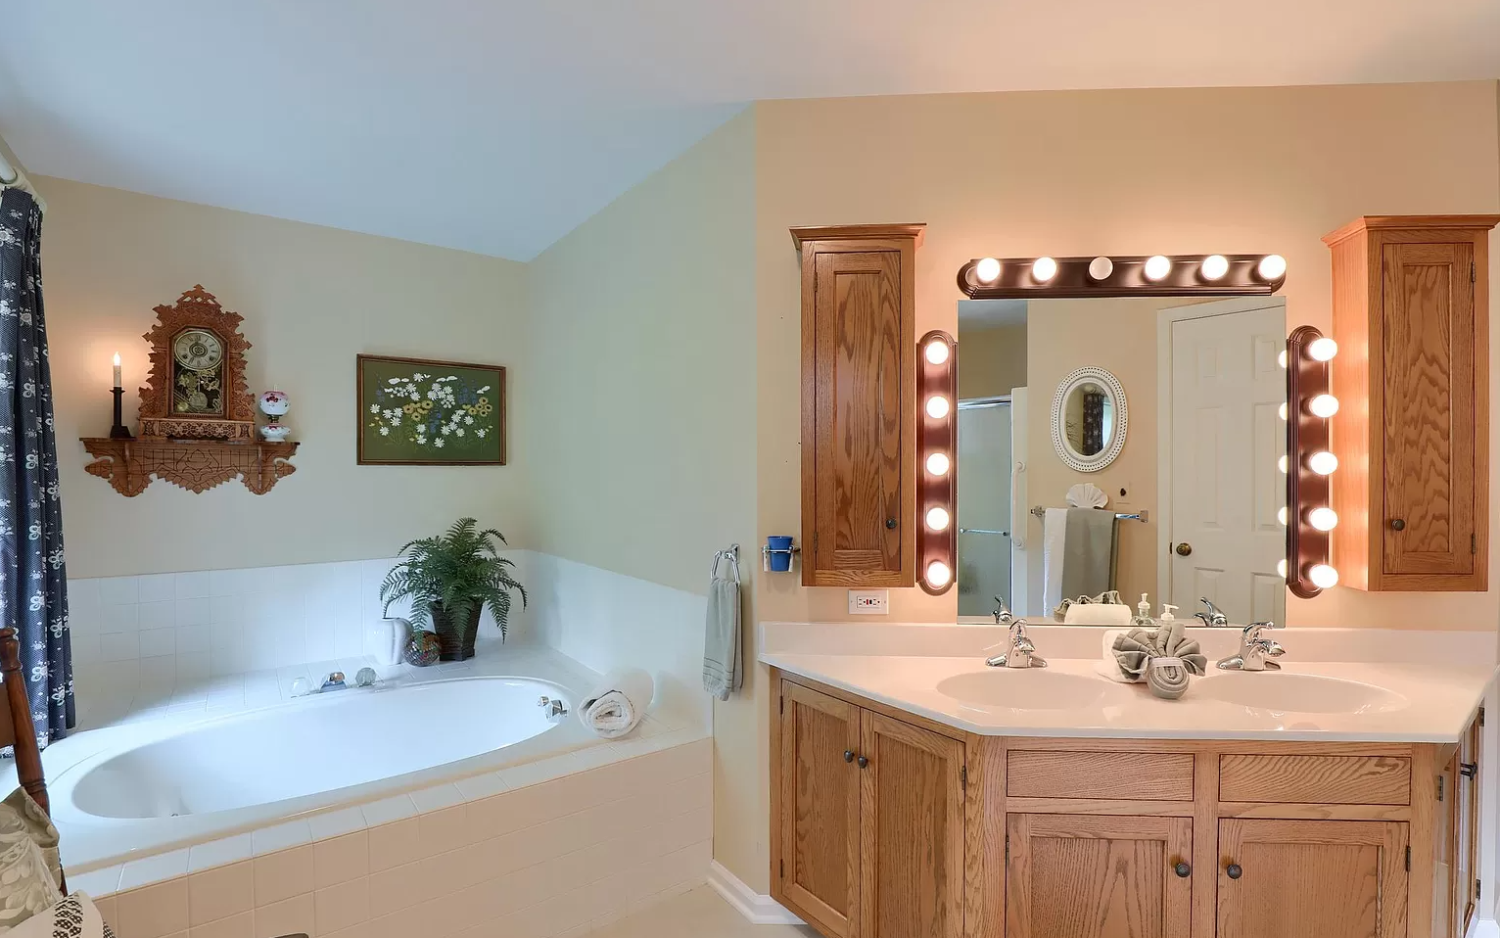 Manheim Township Bathroom before reconfiguration and remodel